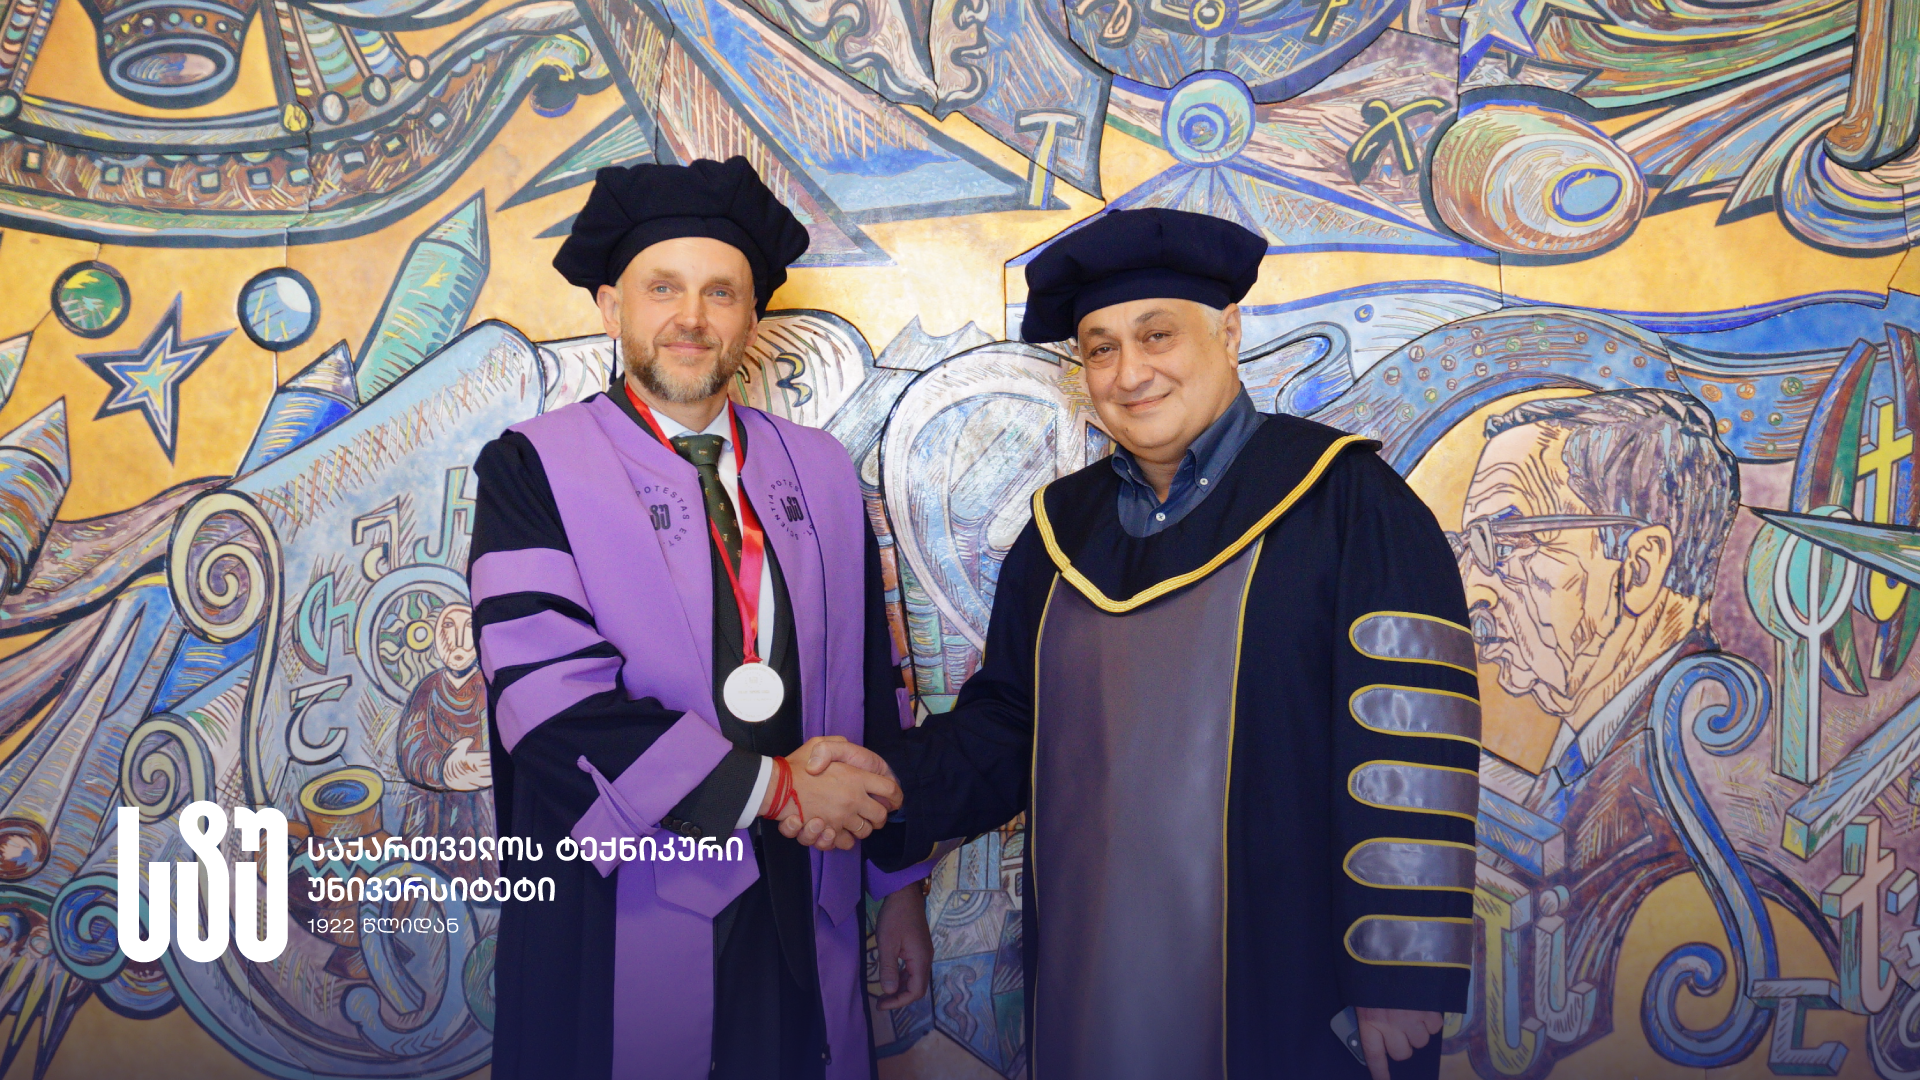 Ambassador of Lithuania to Georgia Andrews Kalindra was awarded the Honorary Doctorate of GTU